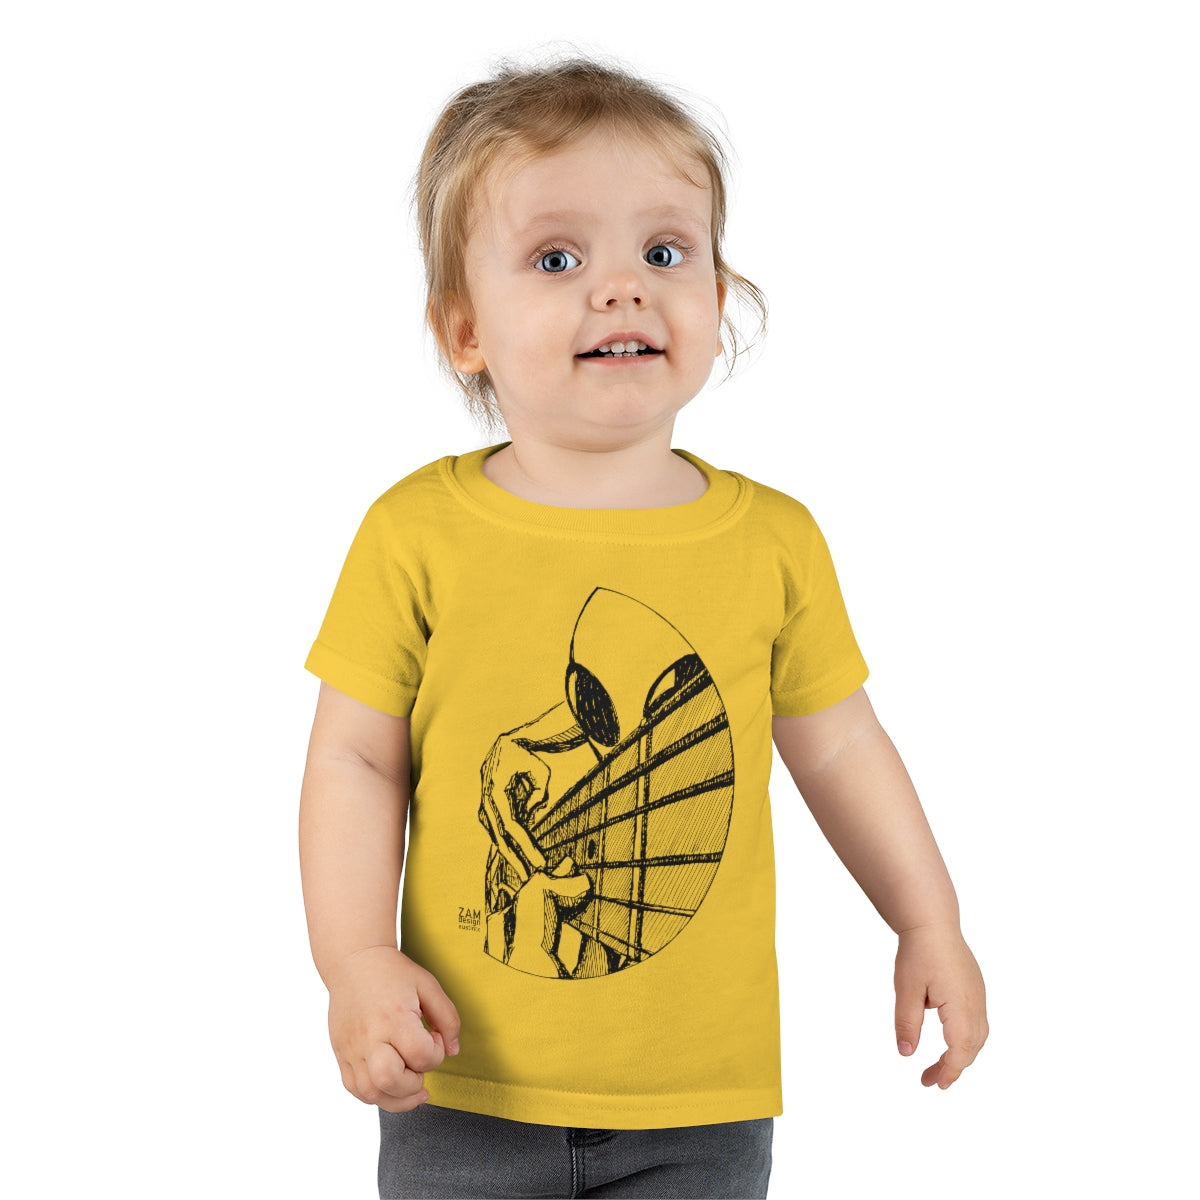 Toddler's Tap In Tee